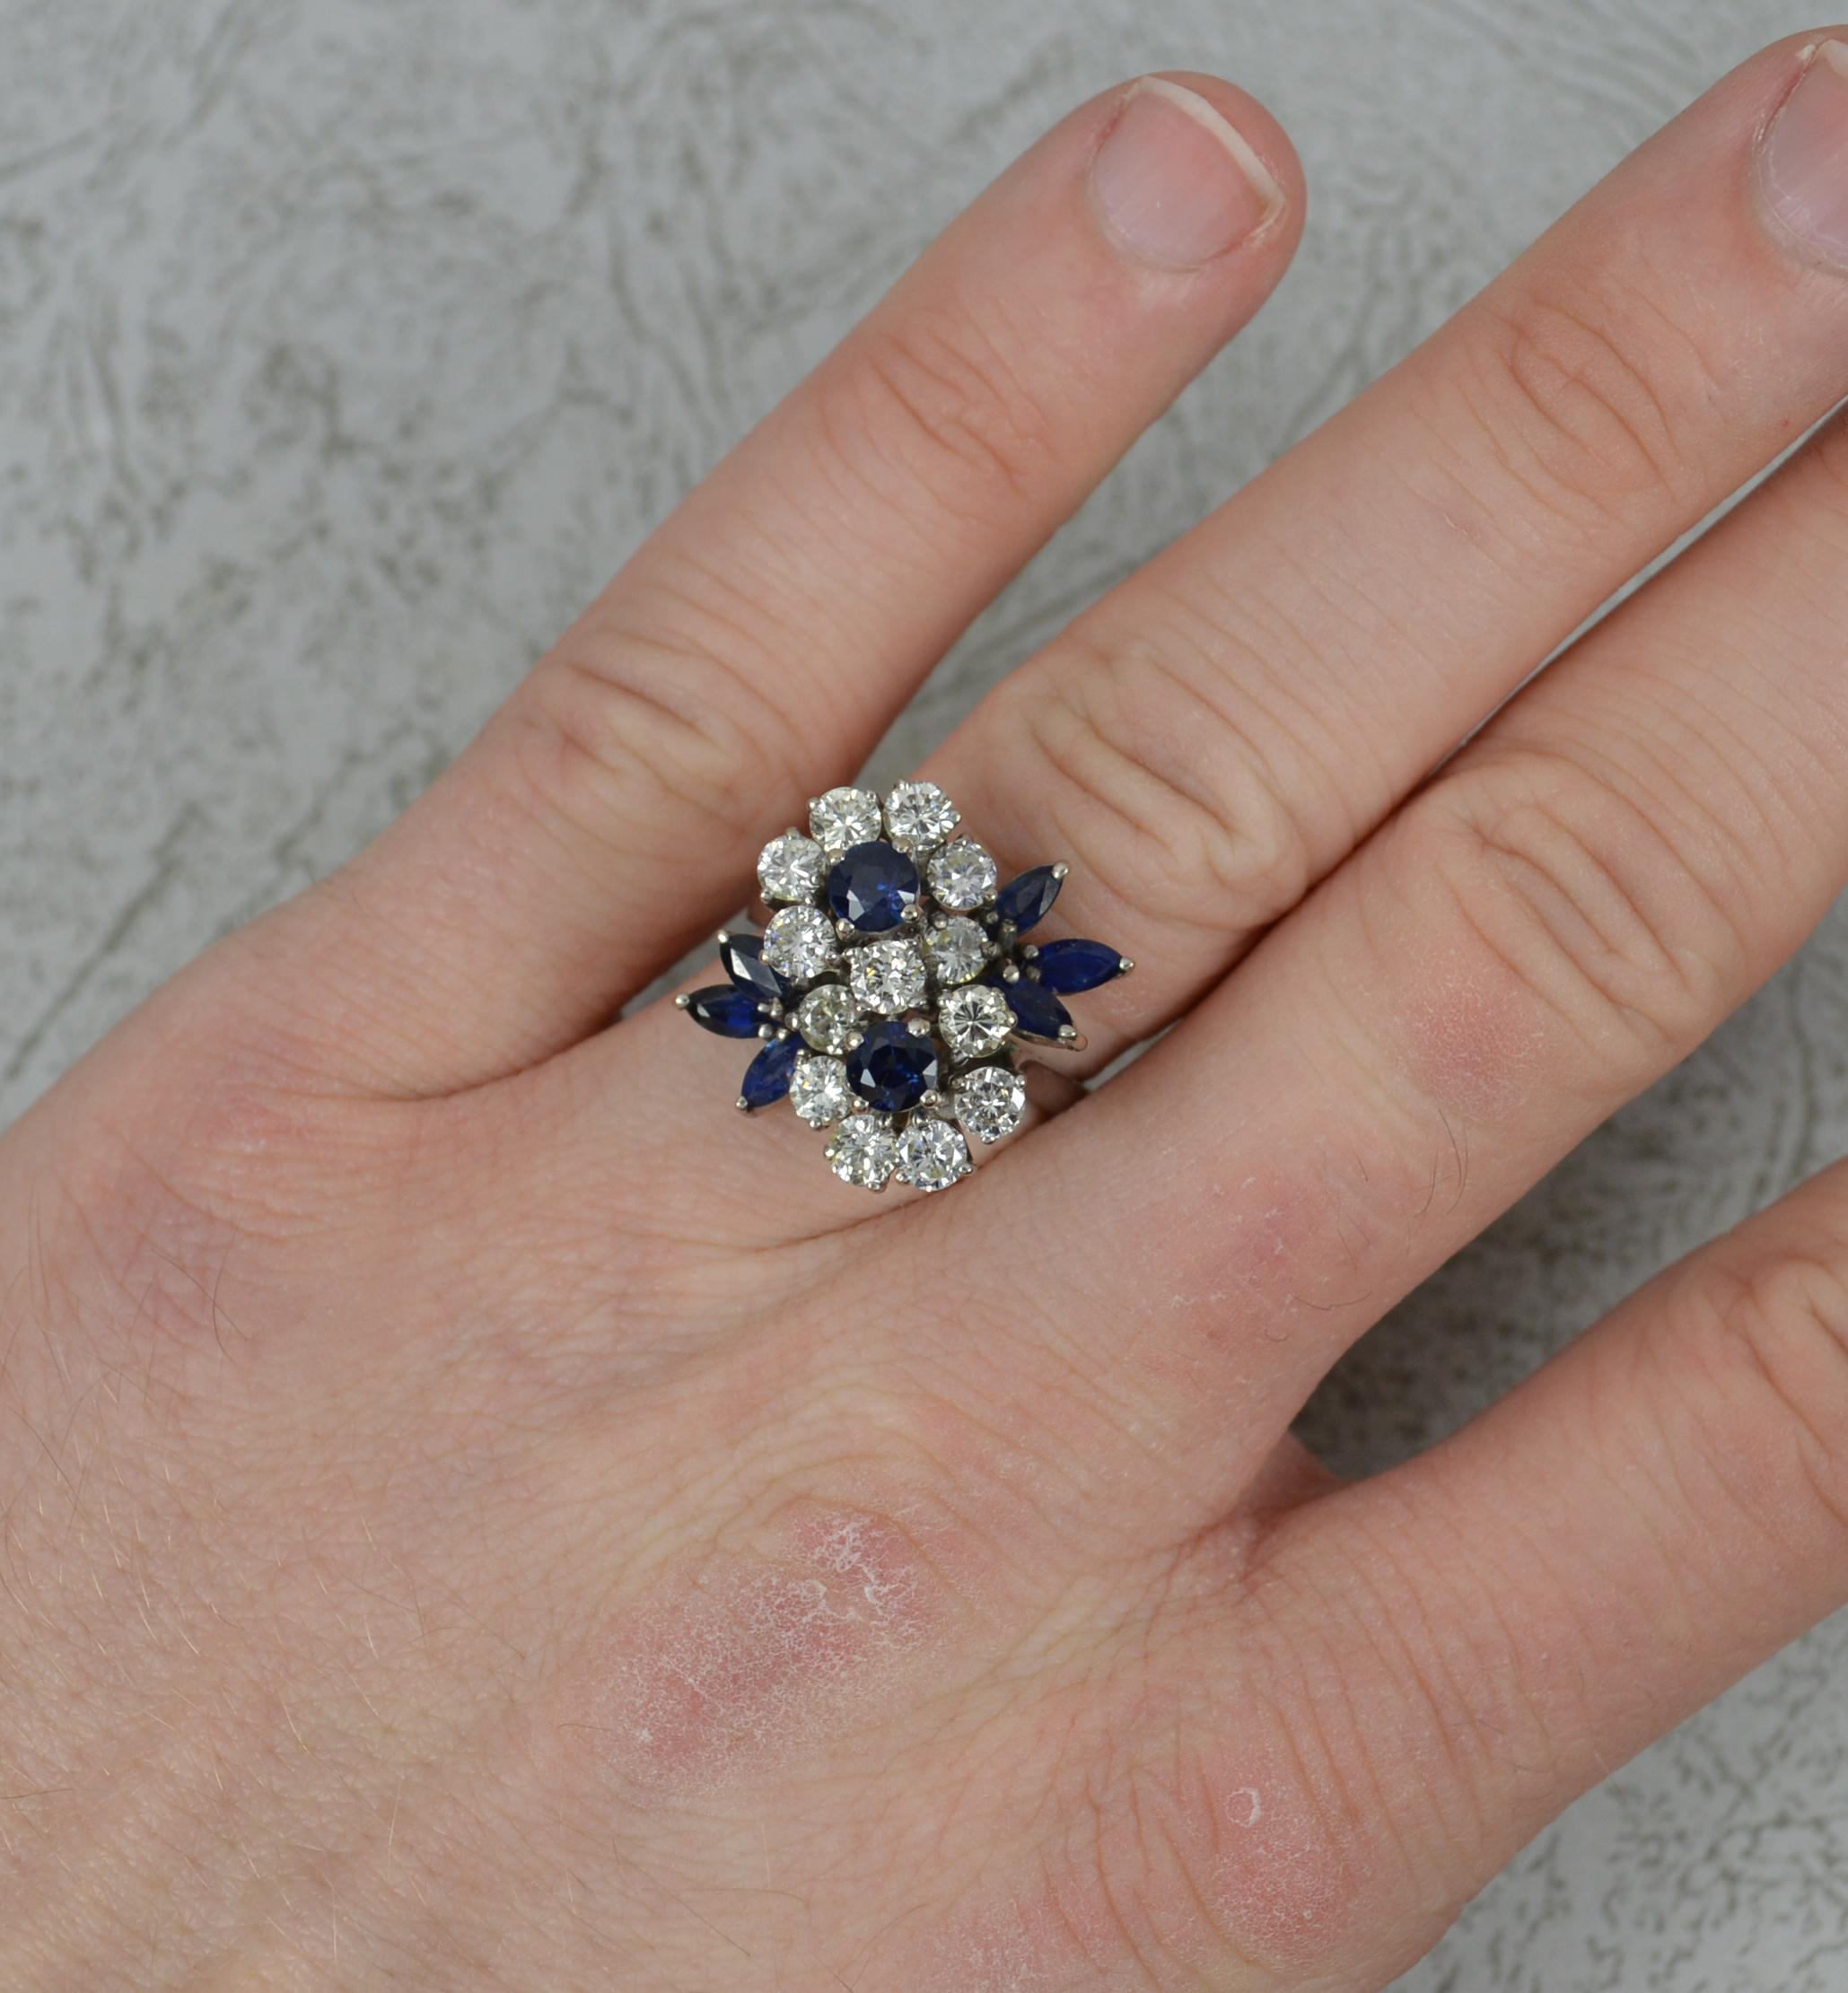 A superb quality vintage double flower cluster ring.
Solid 18 carat white gold example.
Designed with two round cut blue sapphires with full borders of bright round brilliant cut diamonds and three marquise cut blue sapphires to each side. A total